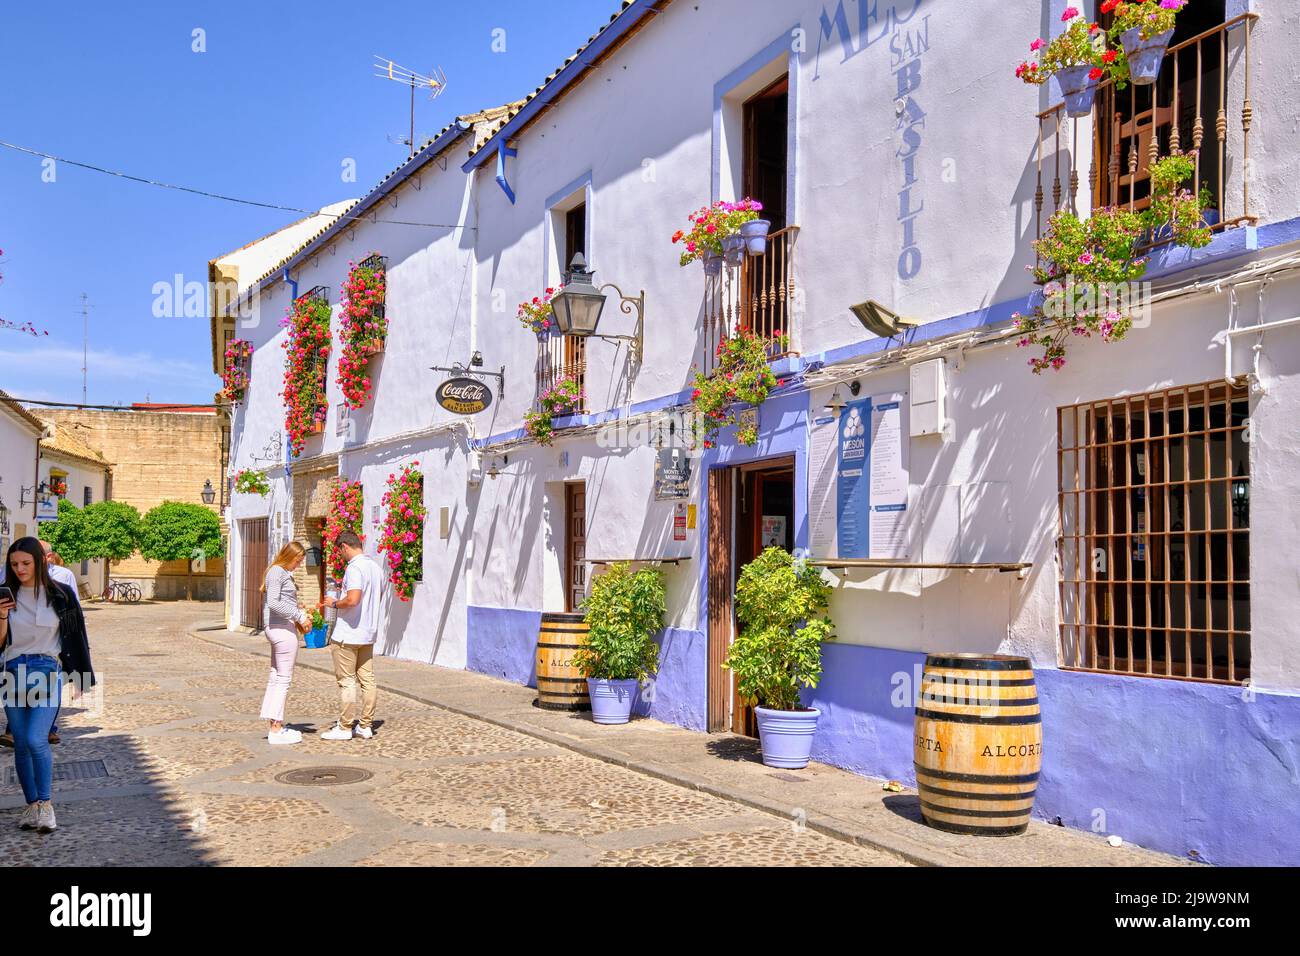 Street of San Basilio, the old district, with a Meson, an old tavern. Cordoba, Andalucia. Spain Stock Photo